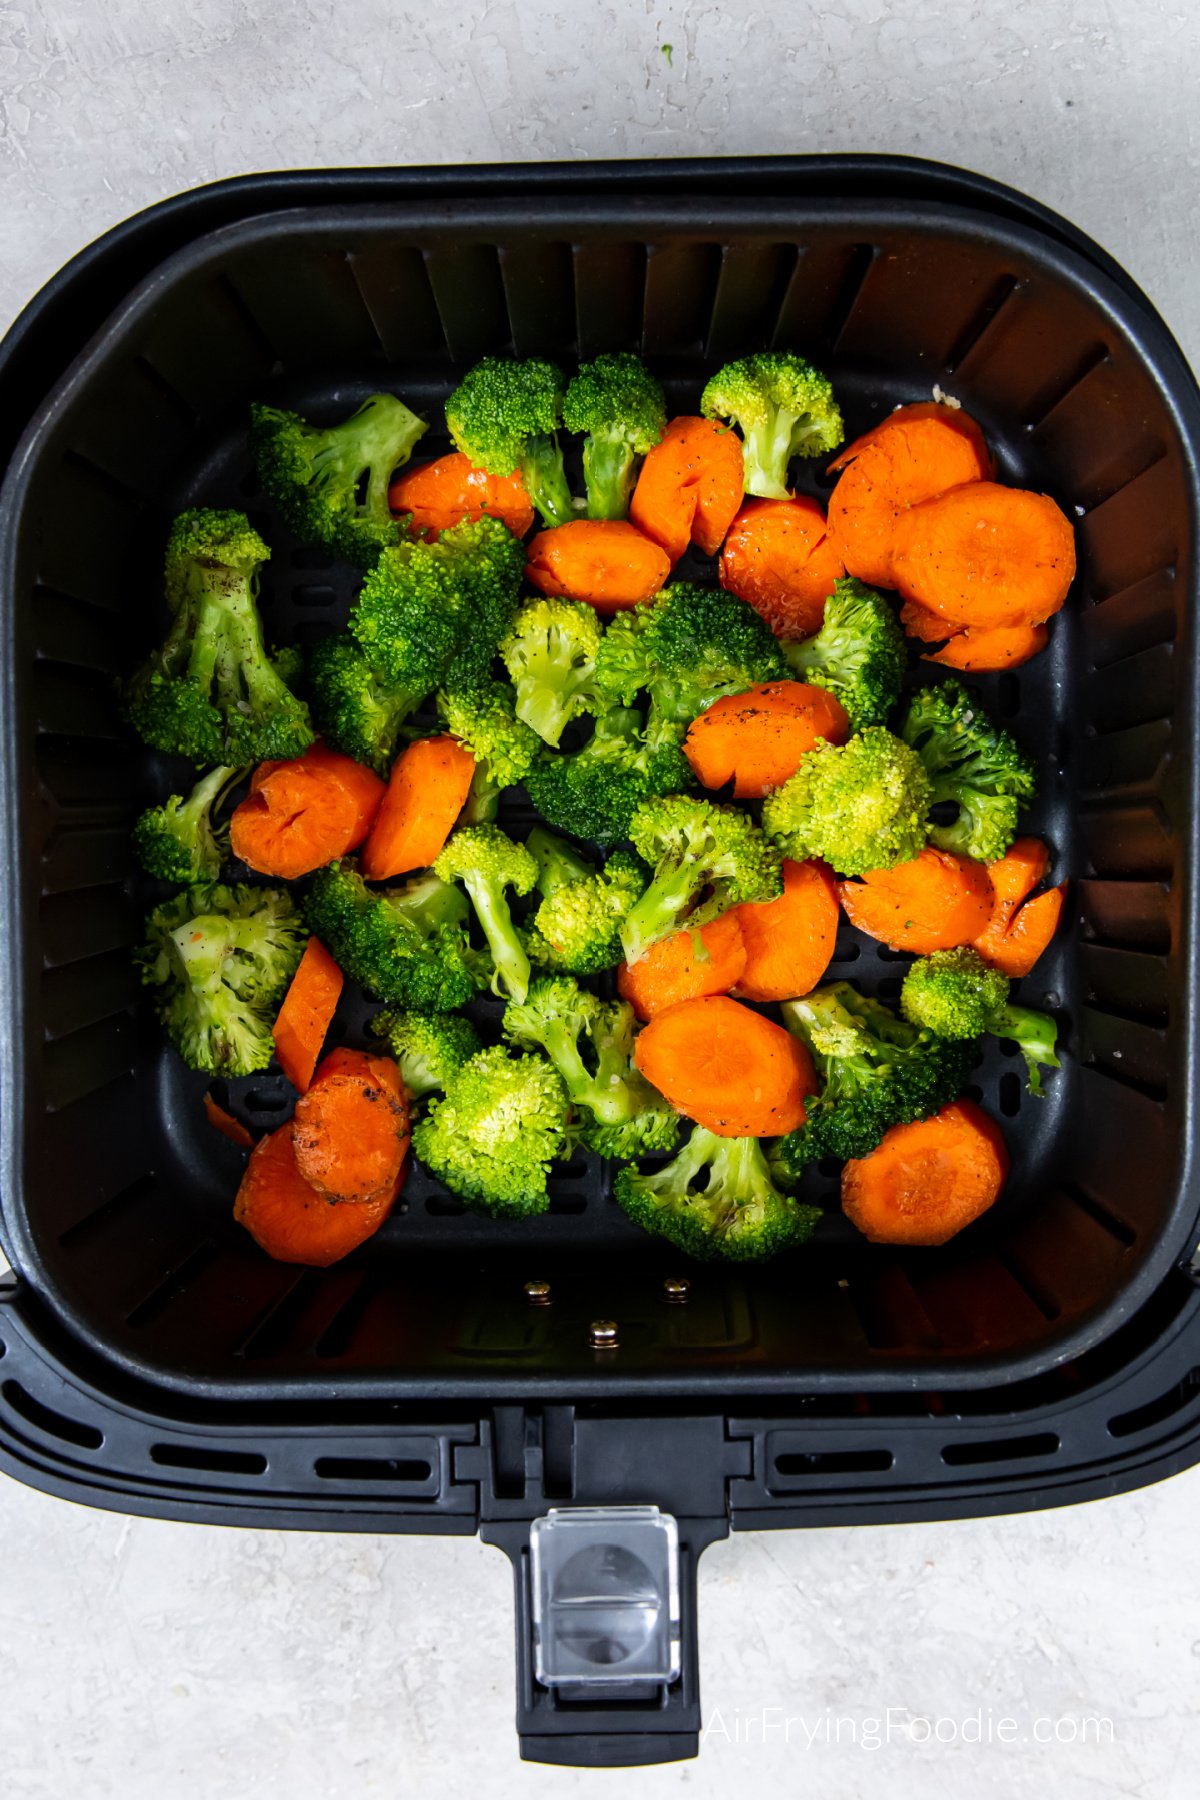 Freshly seasoned broccoli and carrots in the basket of the air fryer.Ready to cook.